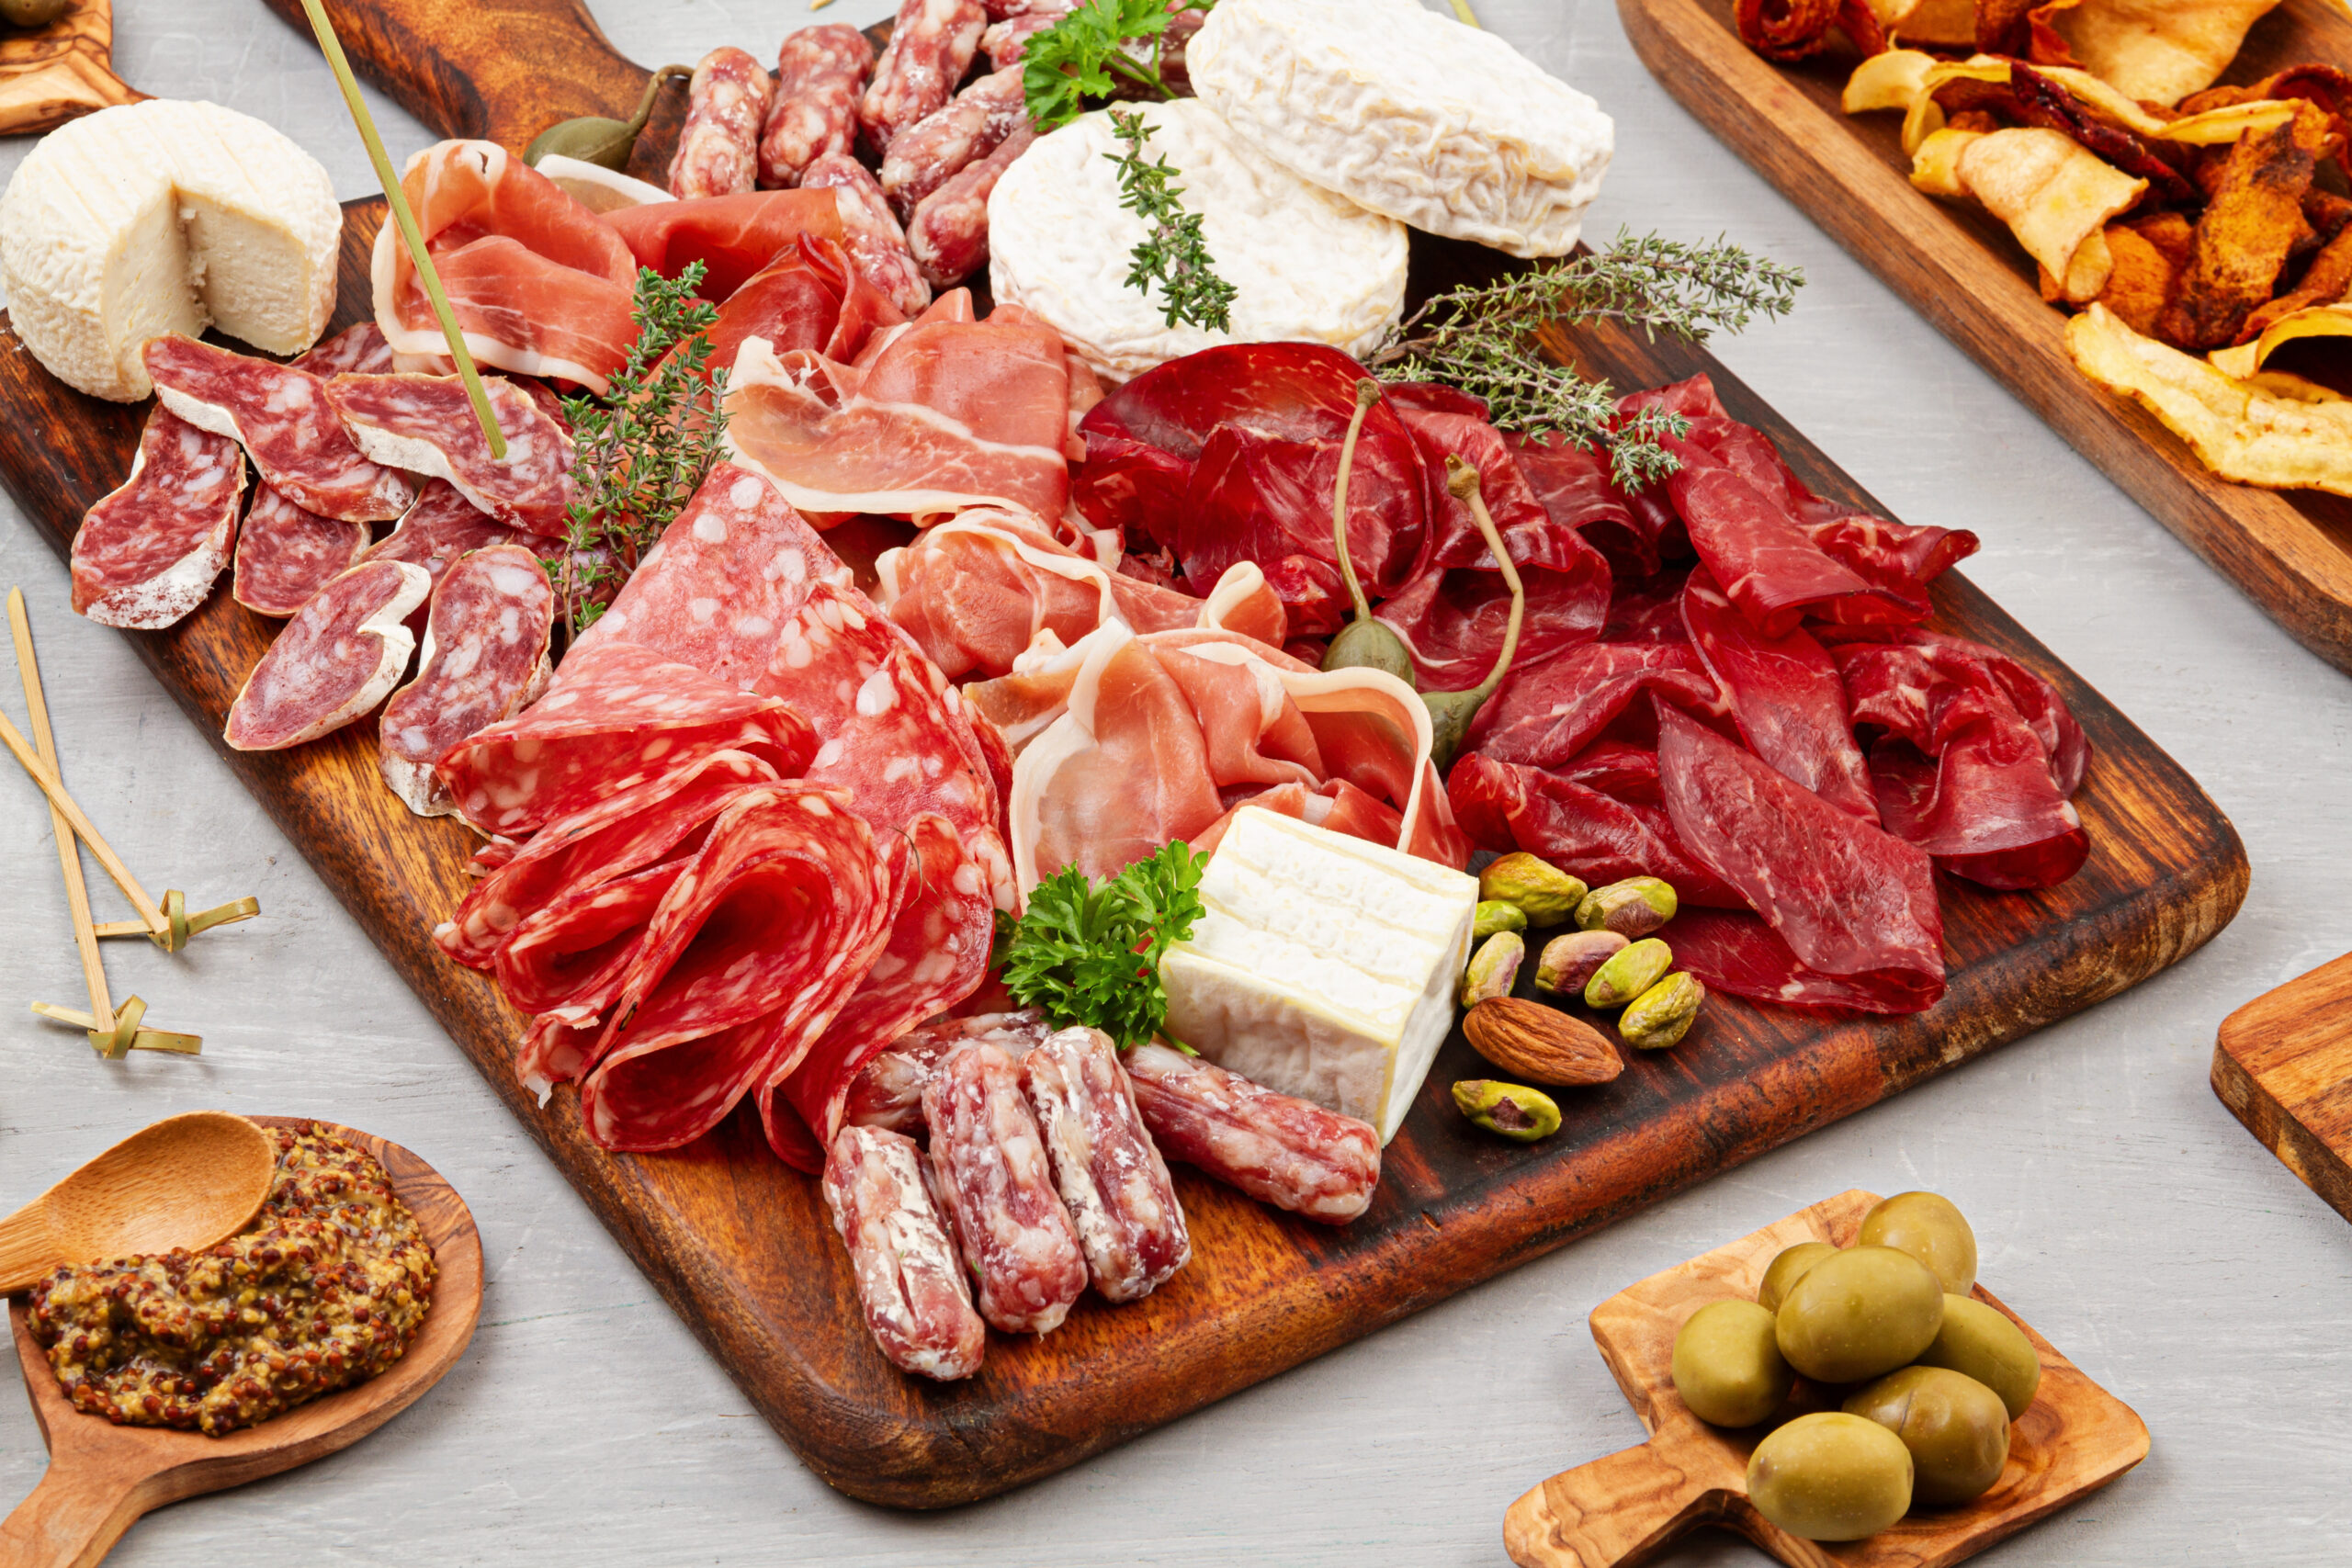 Charcuterie Feast – Meats & Cheeses